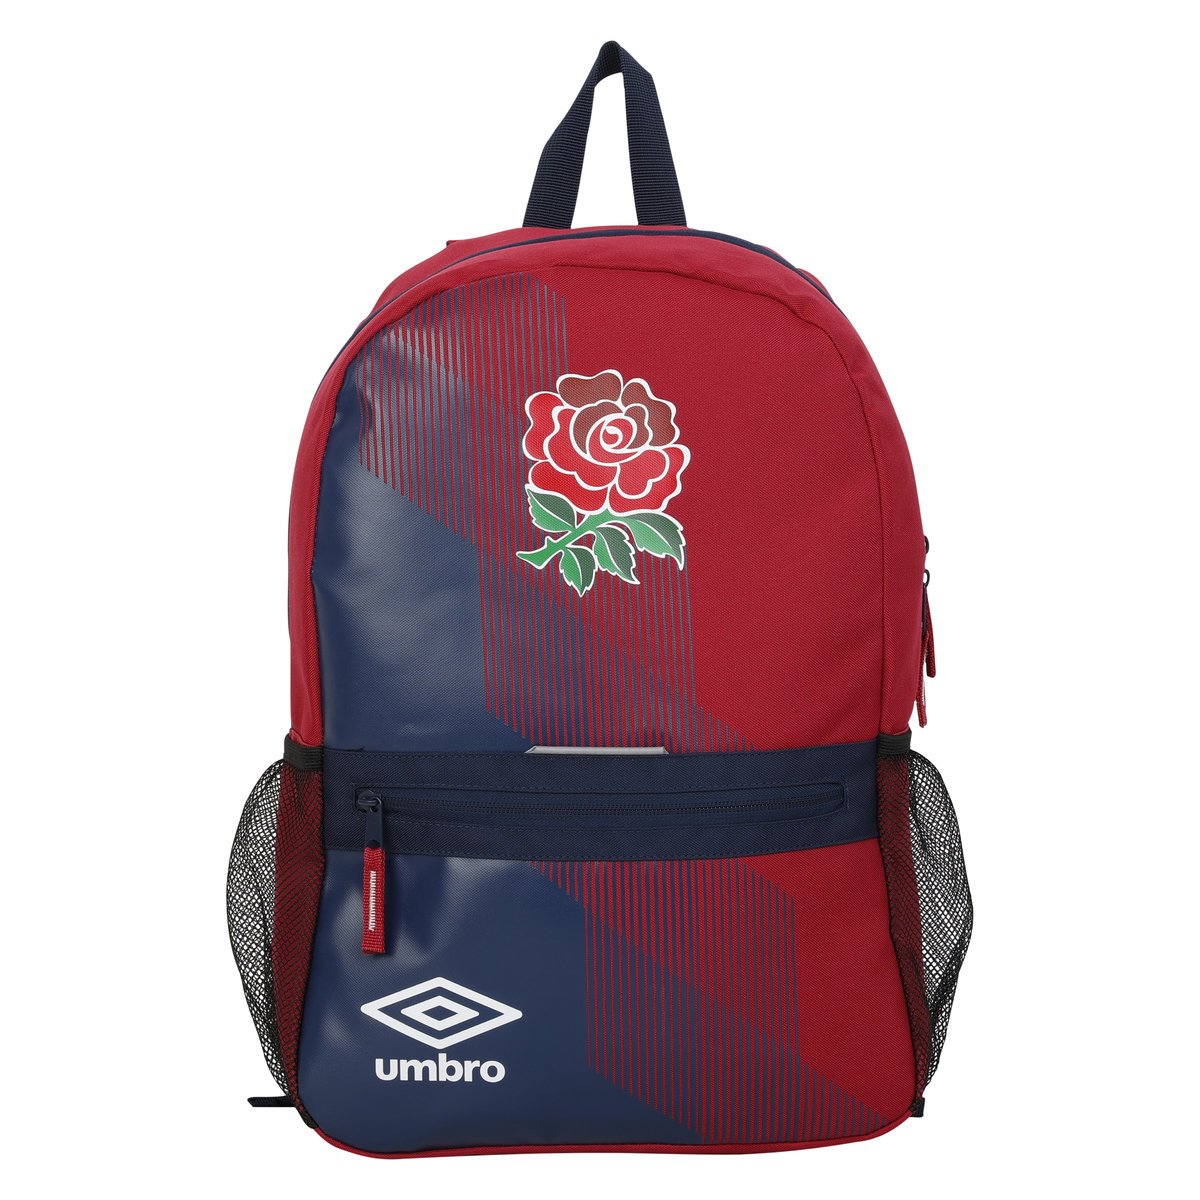 Umbro England Rugby Team Training Academy Backpack: Tibetan Red/White